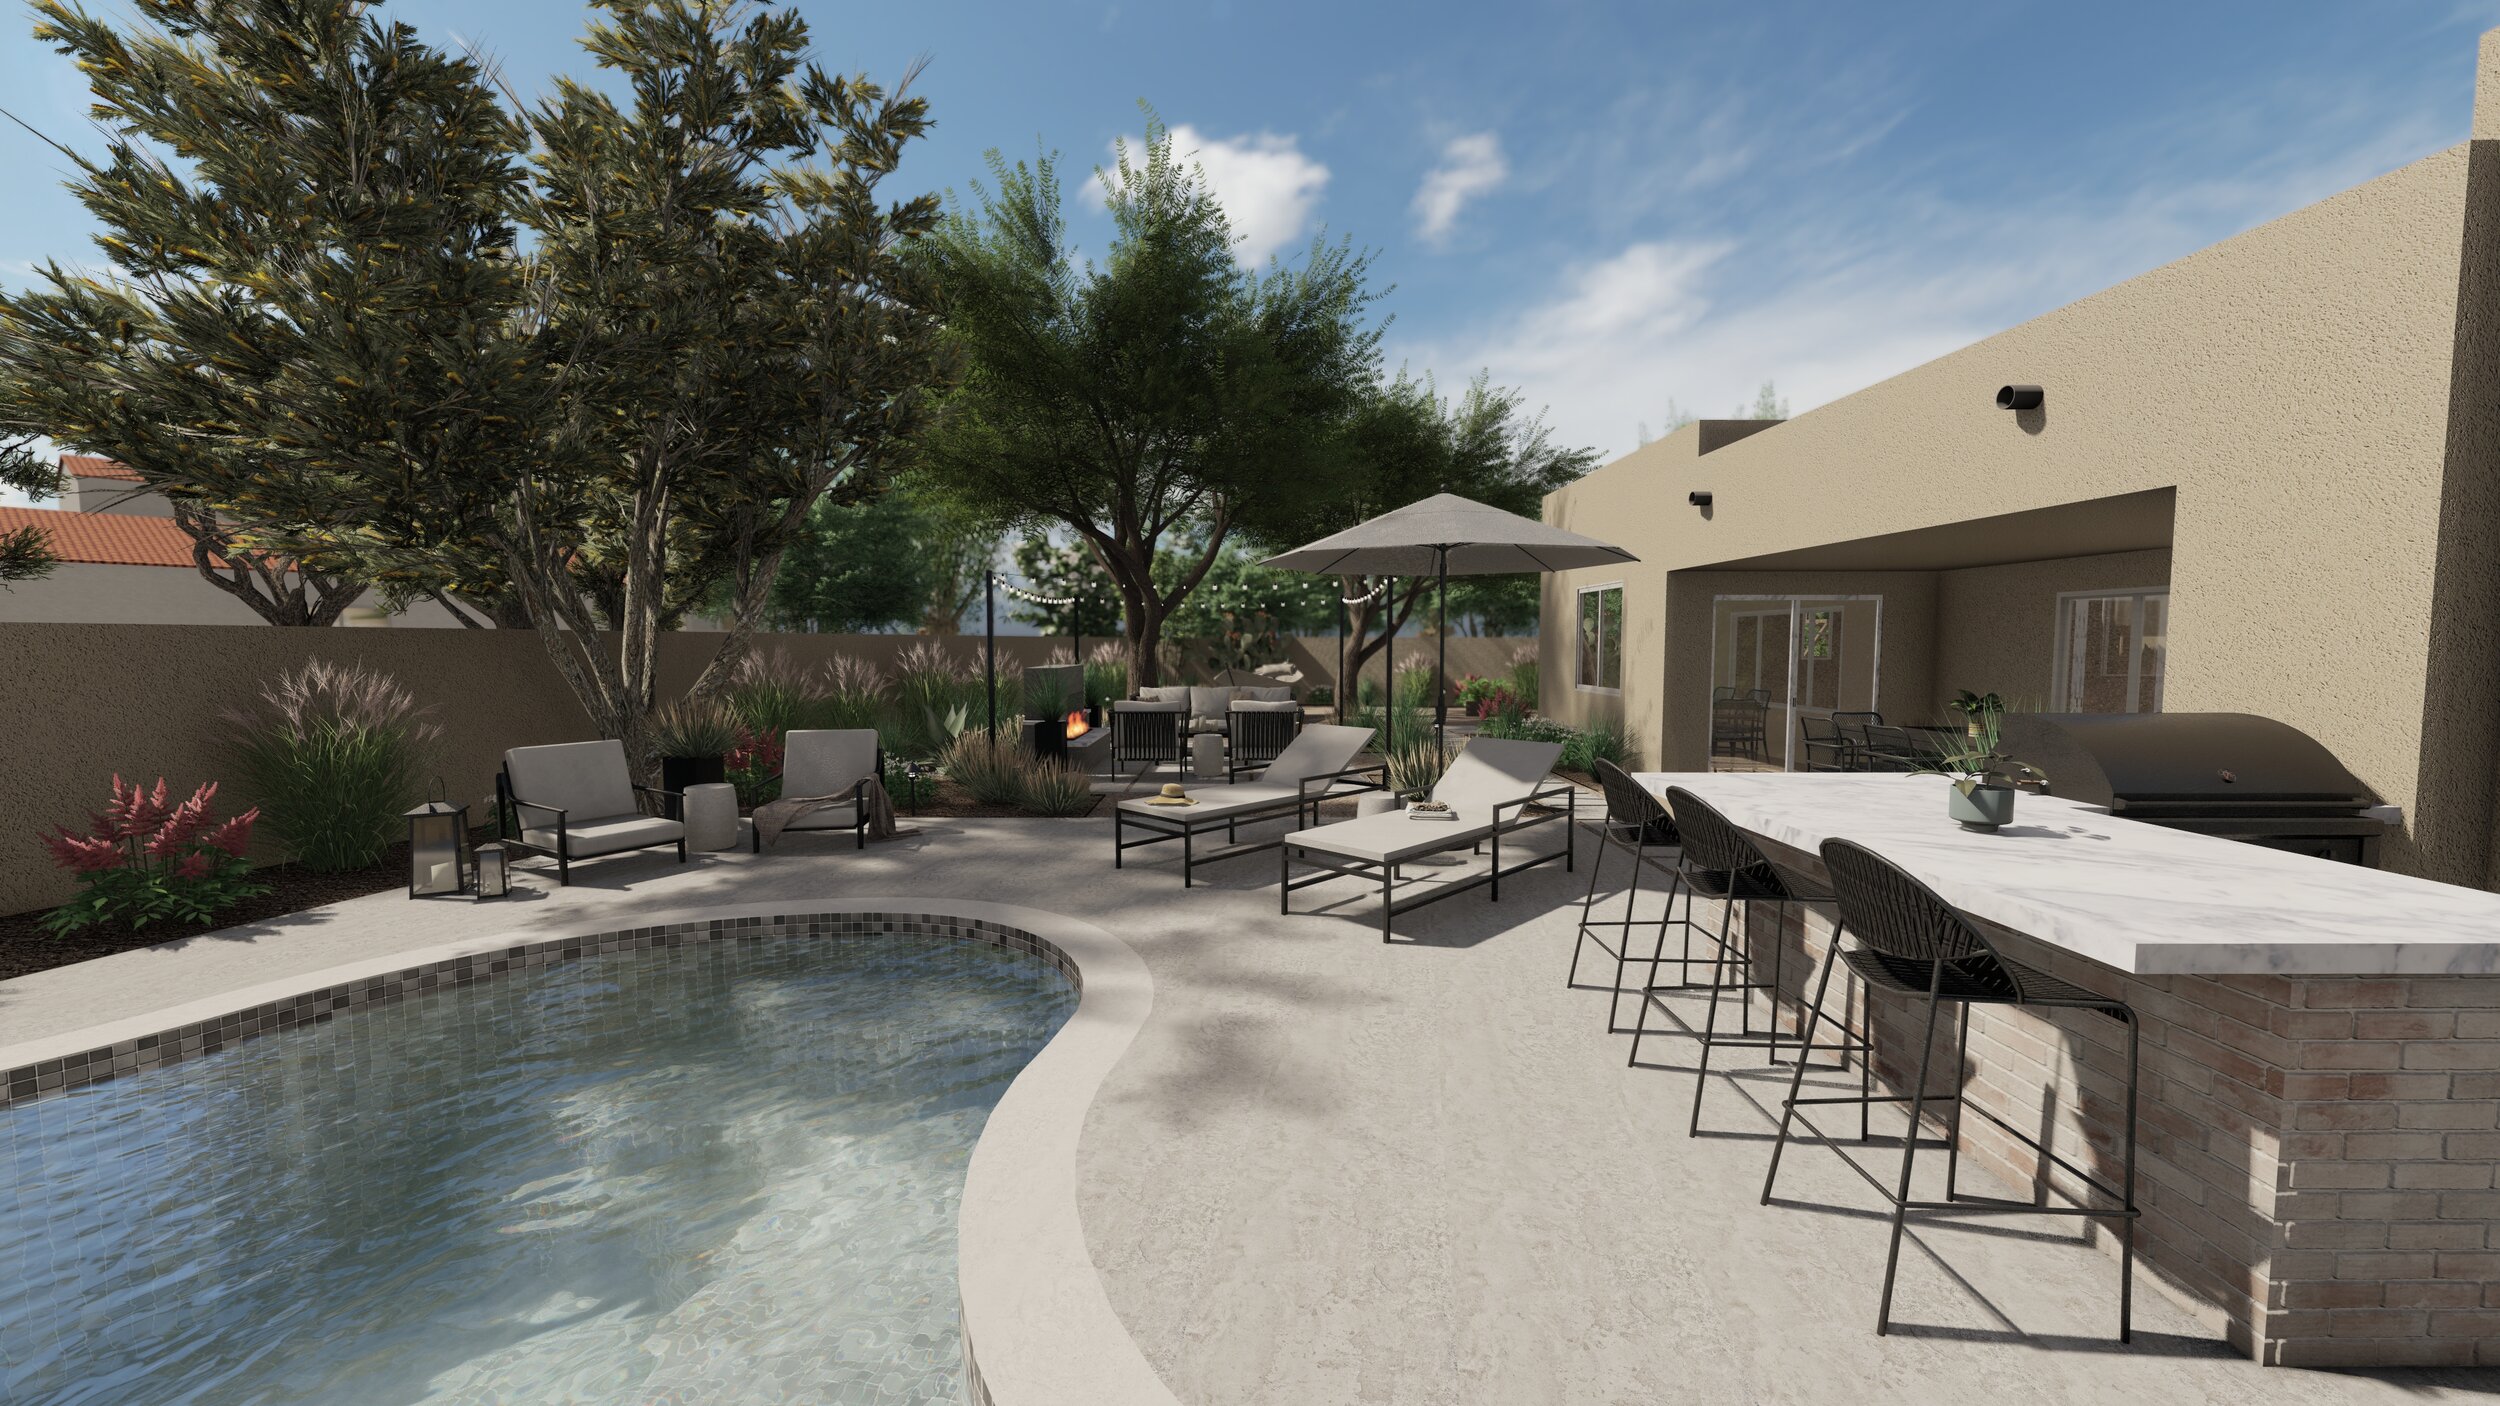 View of desert inspired backyard with swimming pool near outdoor kitchen with bar top seating, lounge area, and fire pit